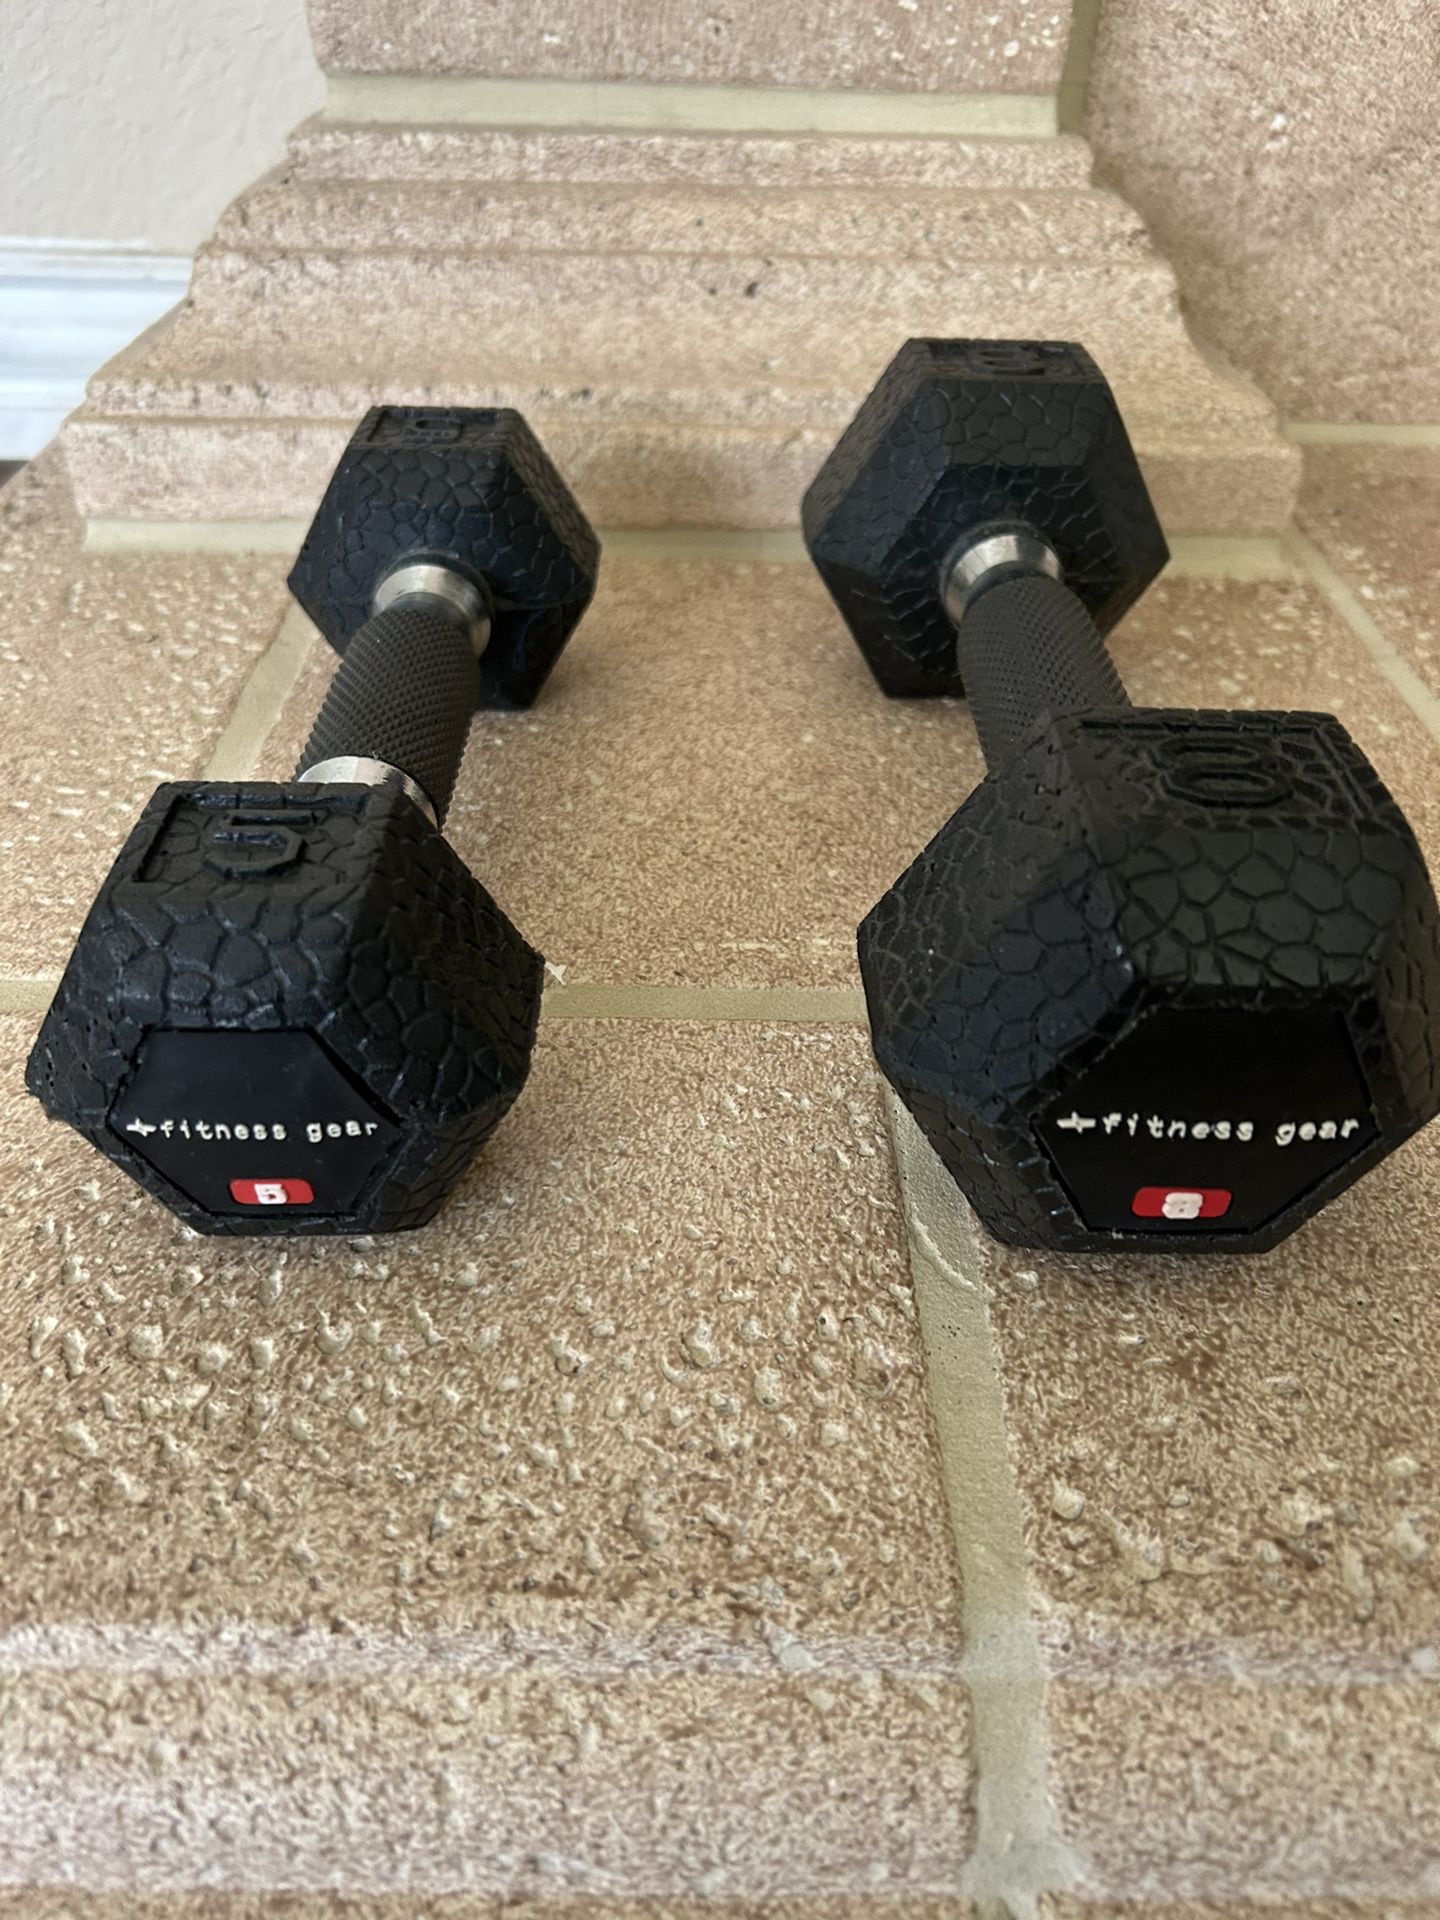 Fitness Gear Dumbbells - 8 lbs and 5 lbs